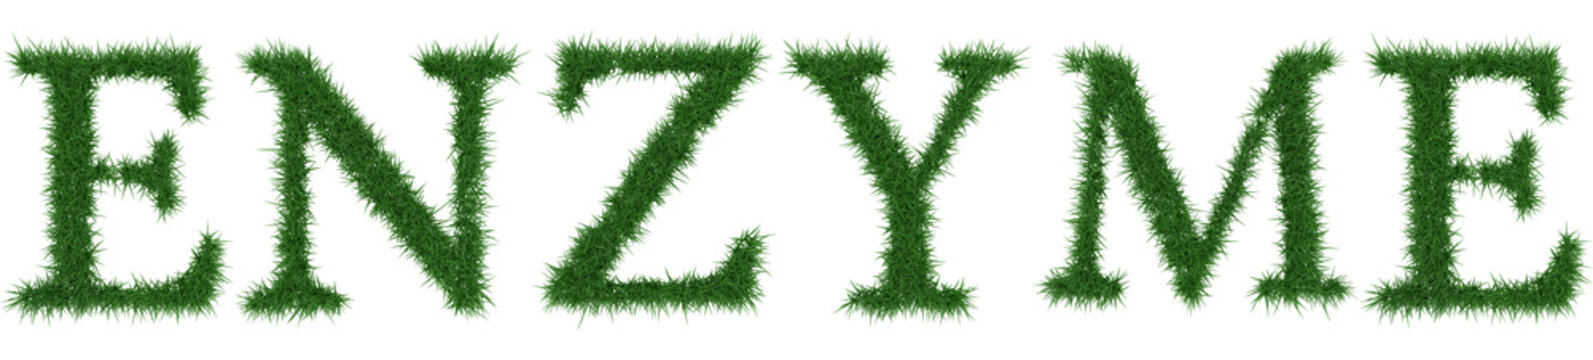 Enzyme - 3D rendering fresh Grass letters isolated on whhite background.